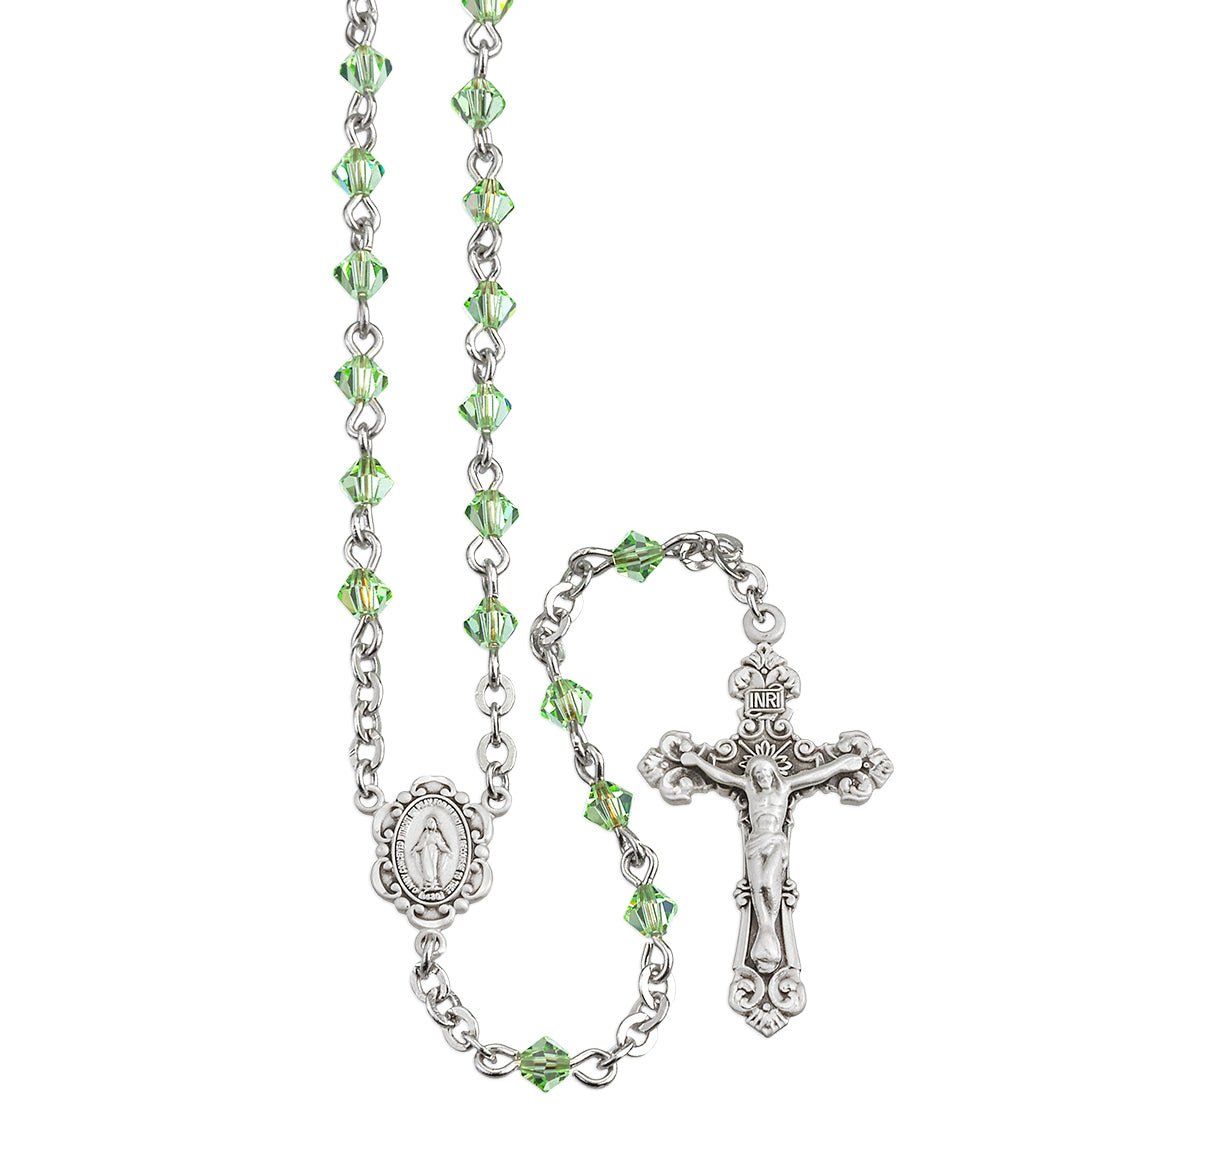 Rosary Sterling Crucifix and Centerpiece Created with Swarovski Crystal 4mm Faceted Tin Cut Bicone Beads in Chrysolite by HMH